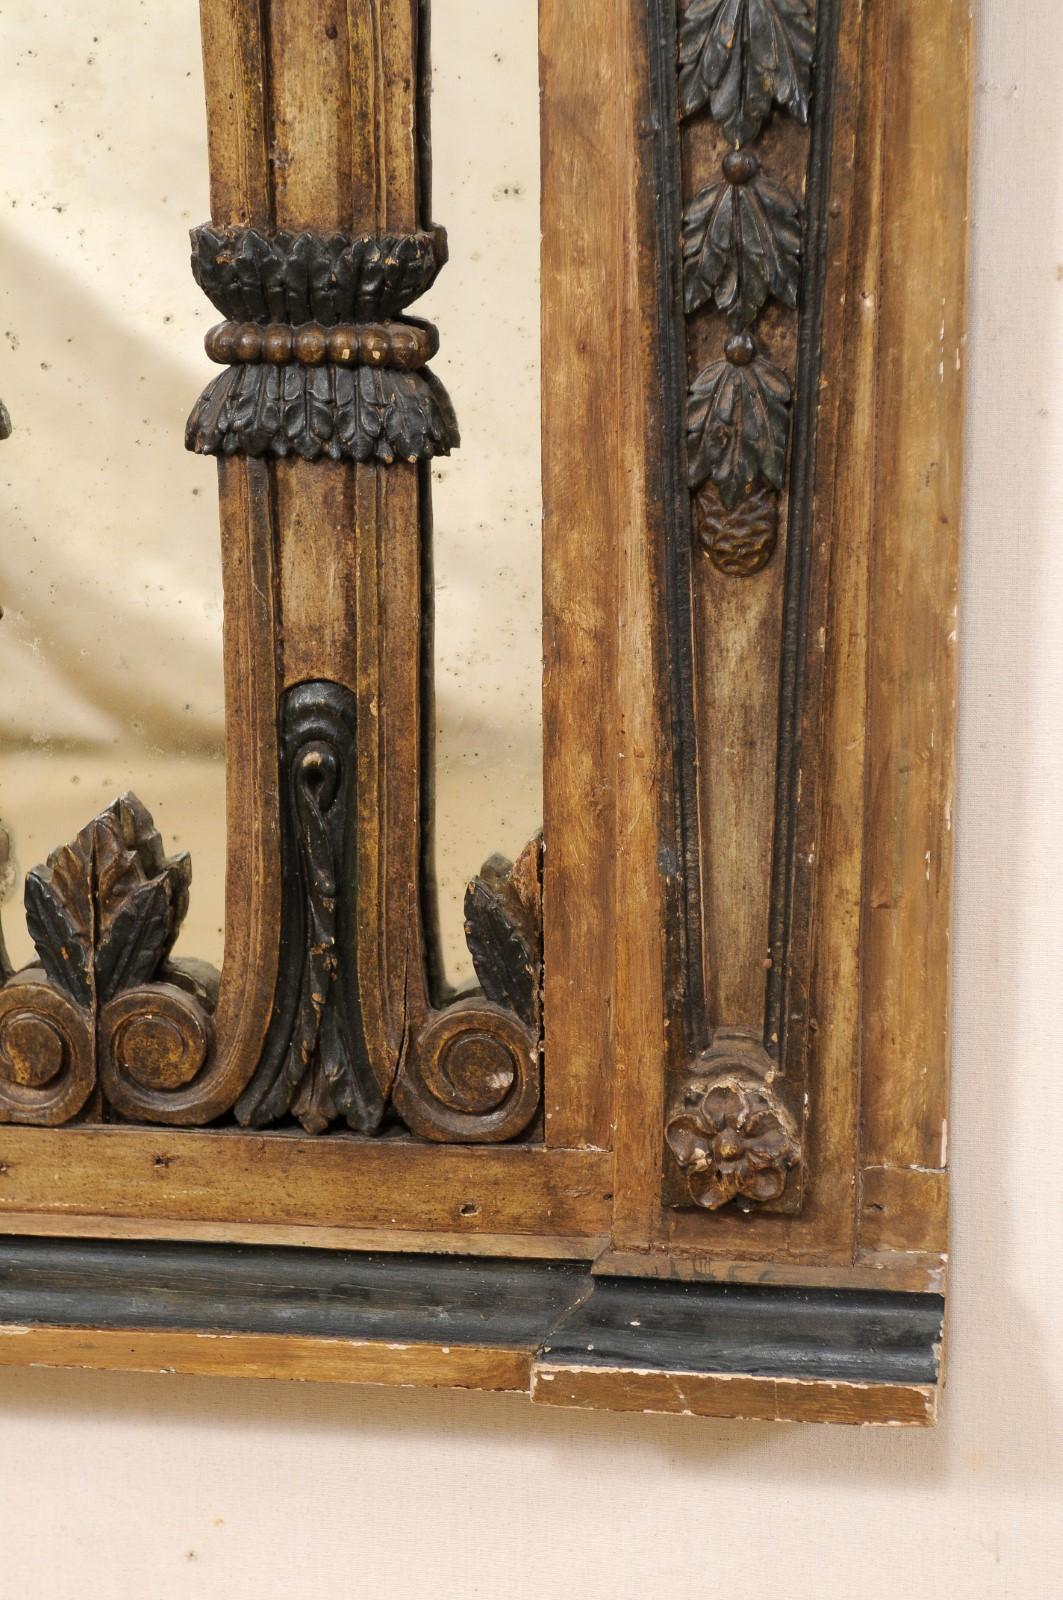 Early 19th Century Portuguese Carved Wood Gate with Mirror at Backside For Sale 2